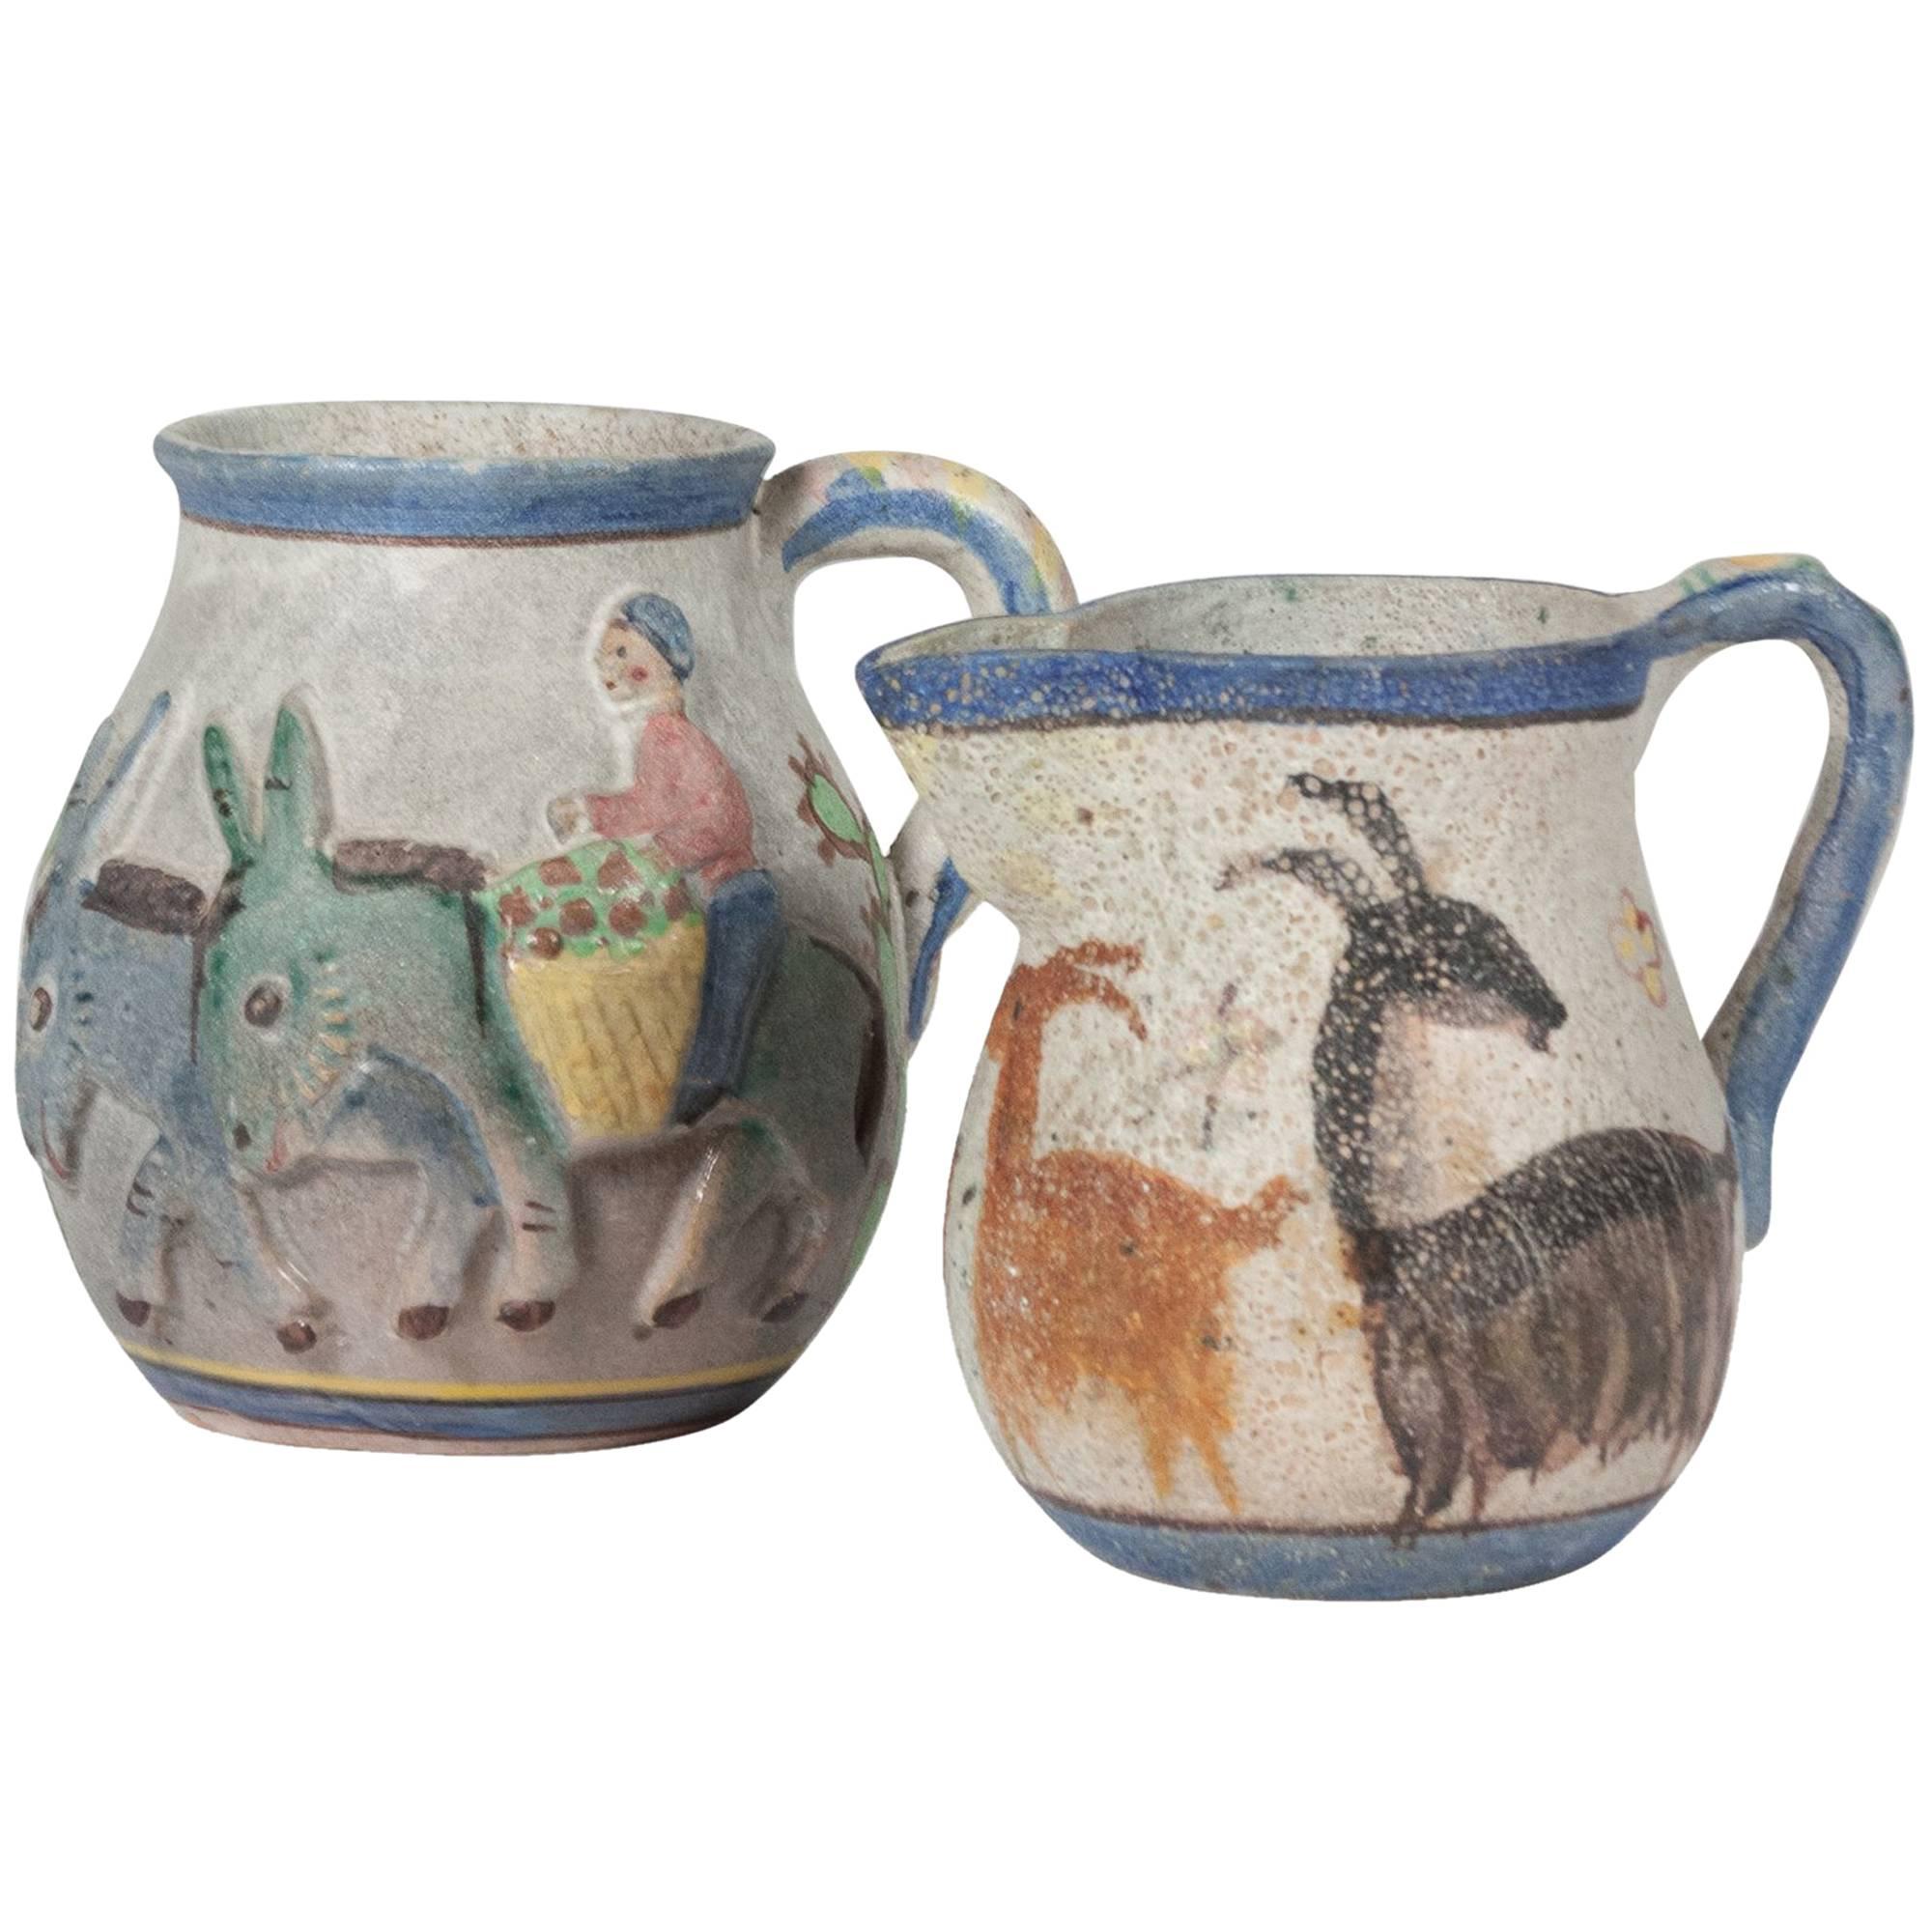 Two Hand-Painted Ceramic Pitchers by Guido Gambone For Sale